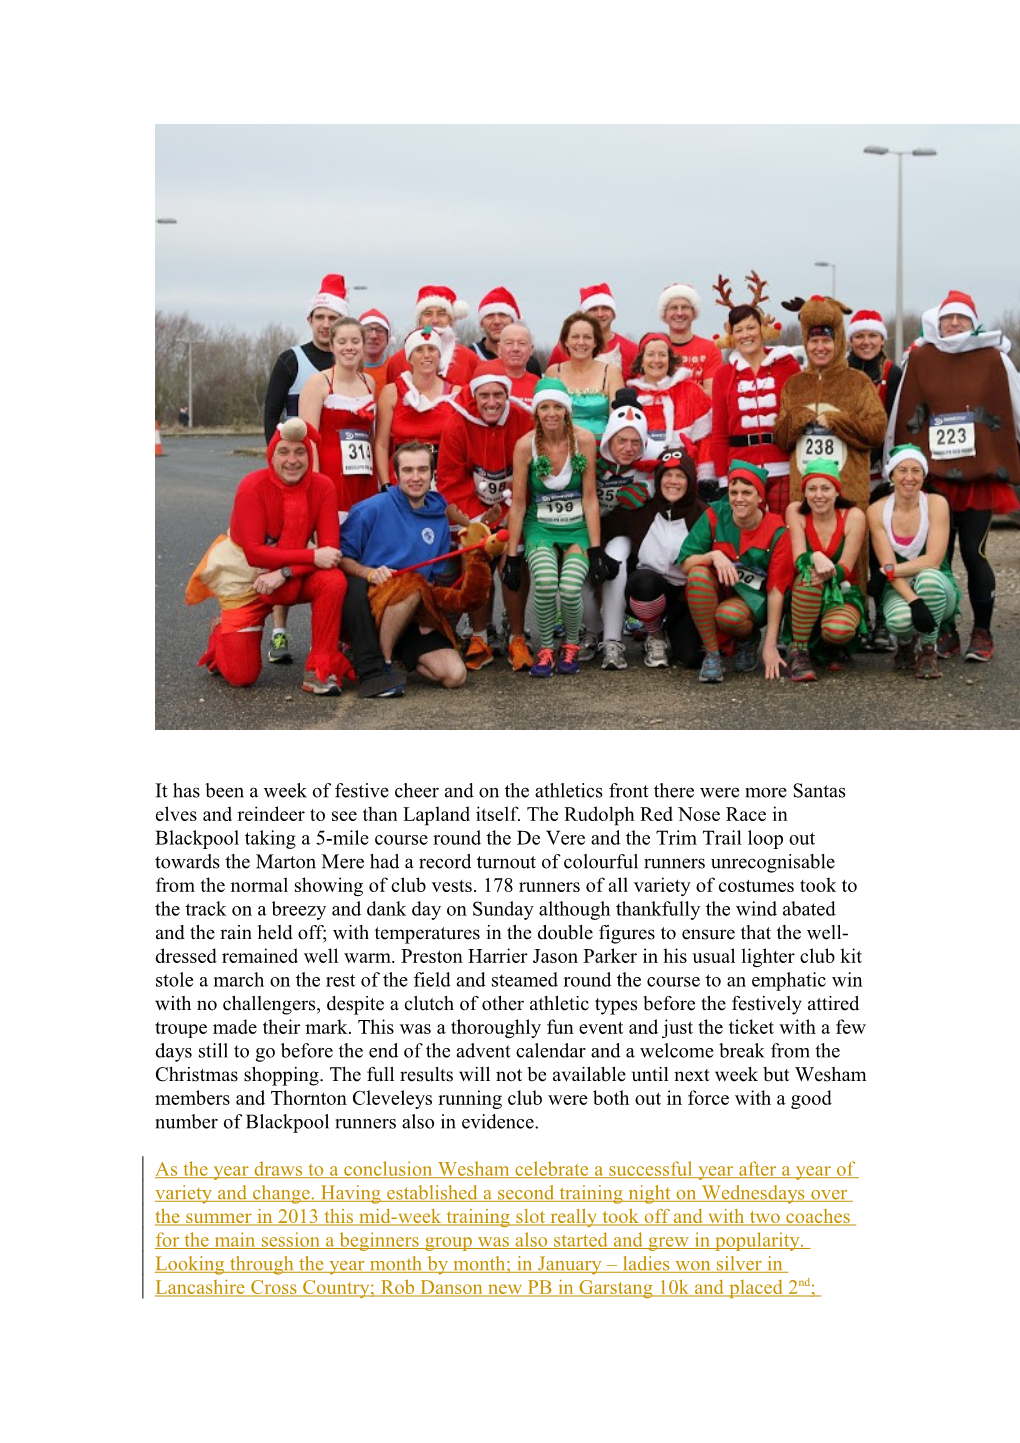 It Has Been a Week of Festive Cheer and on the Athletics Front There Were More Santas Elves